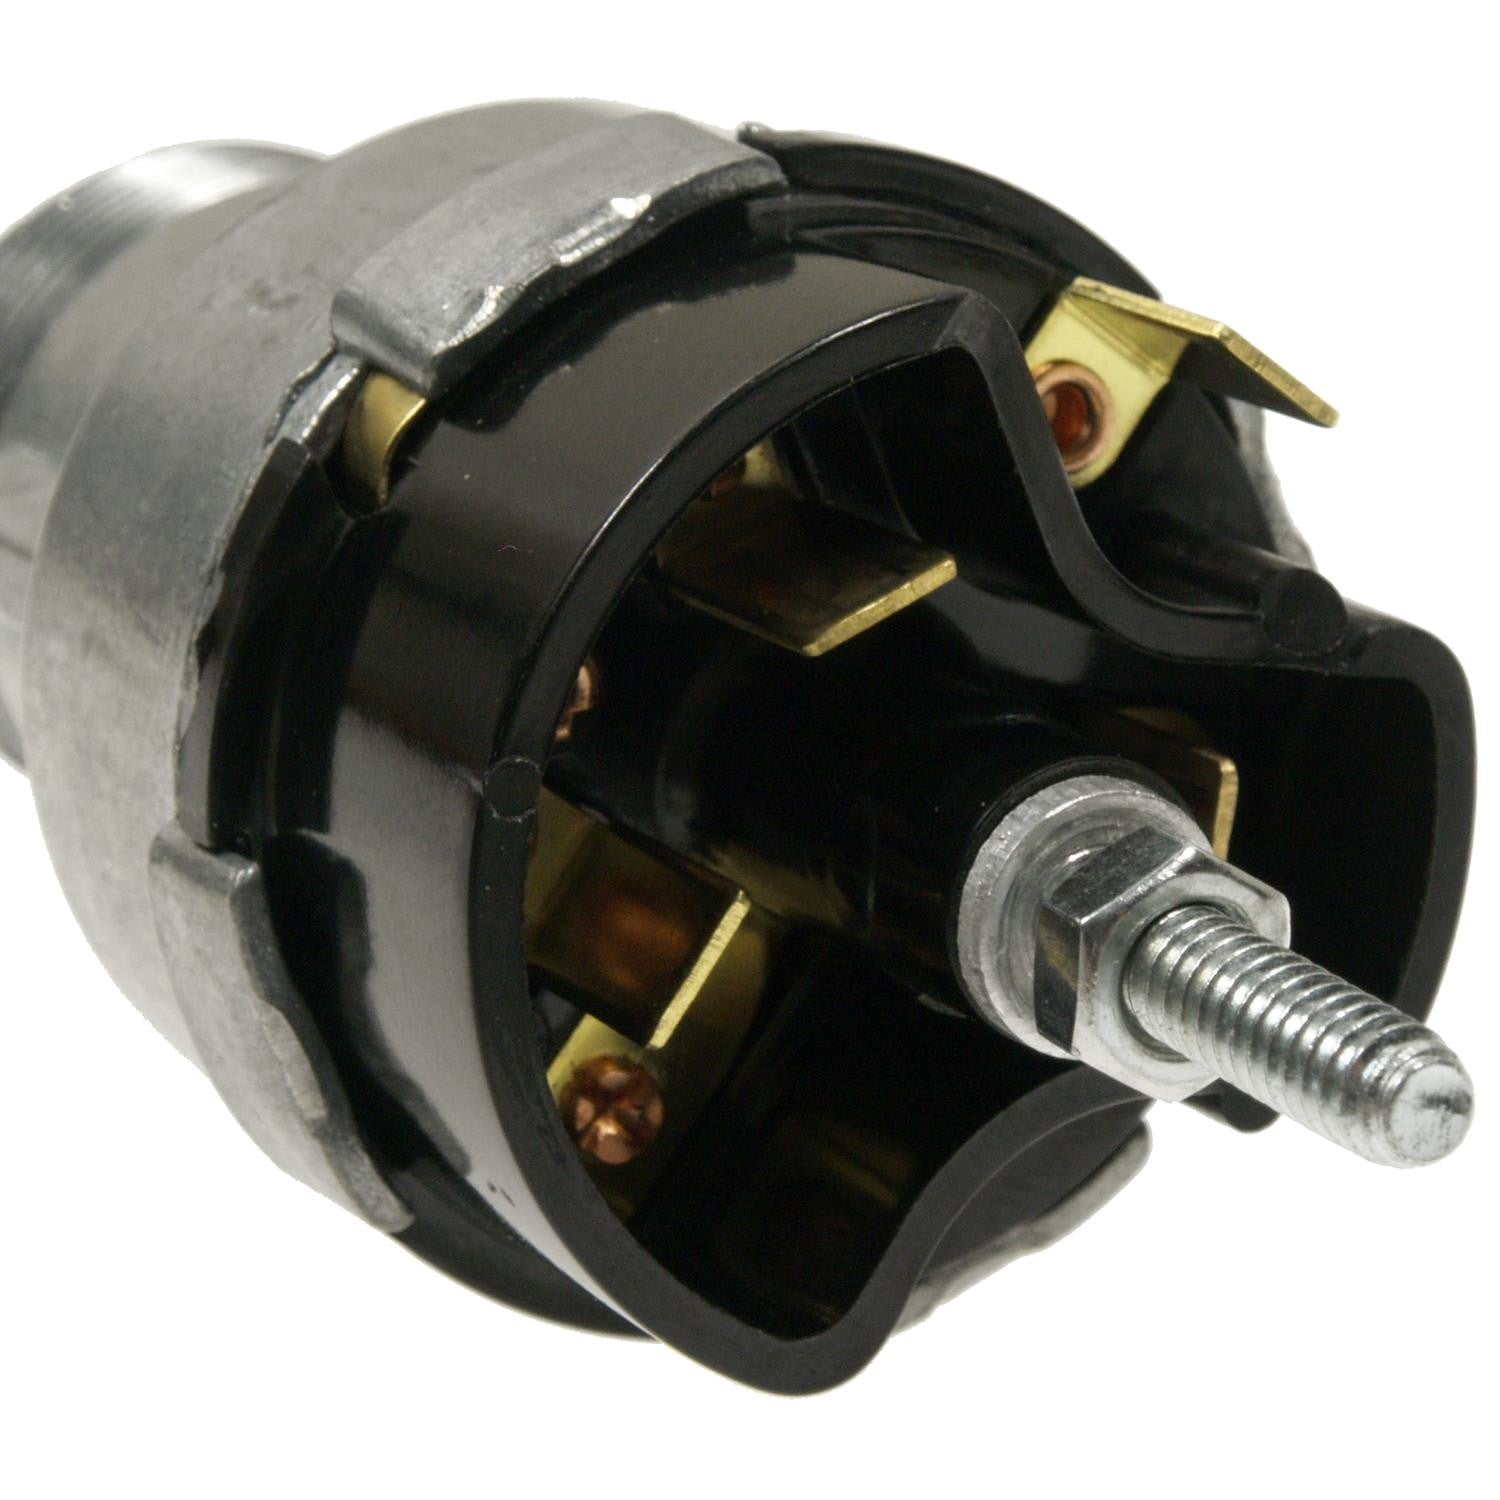 Standard US-49  Ignition Switch for Ford Mercury